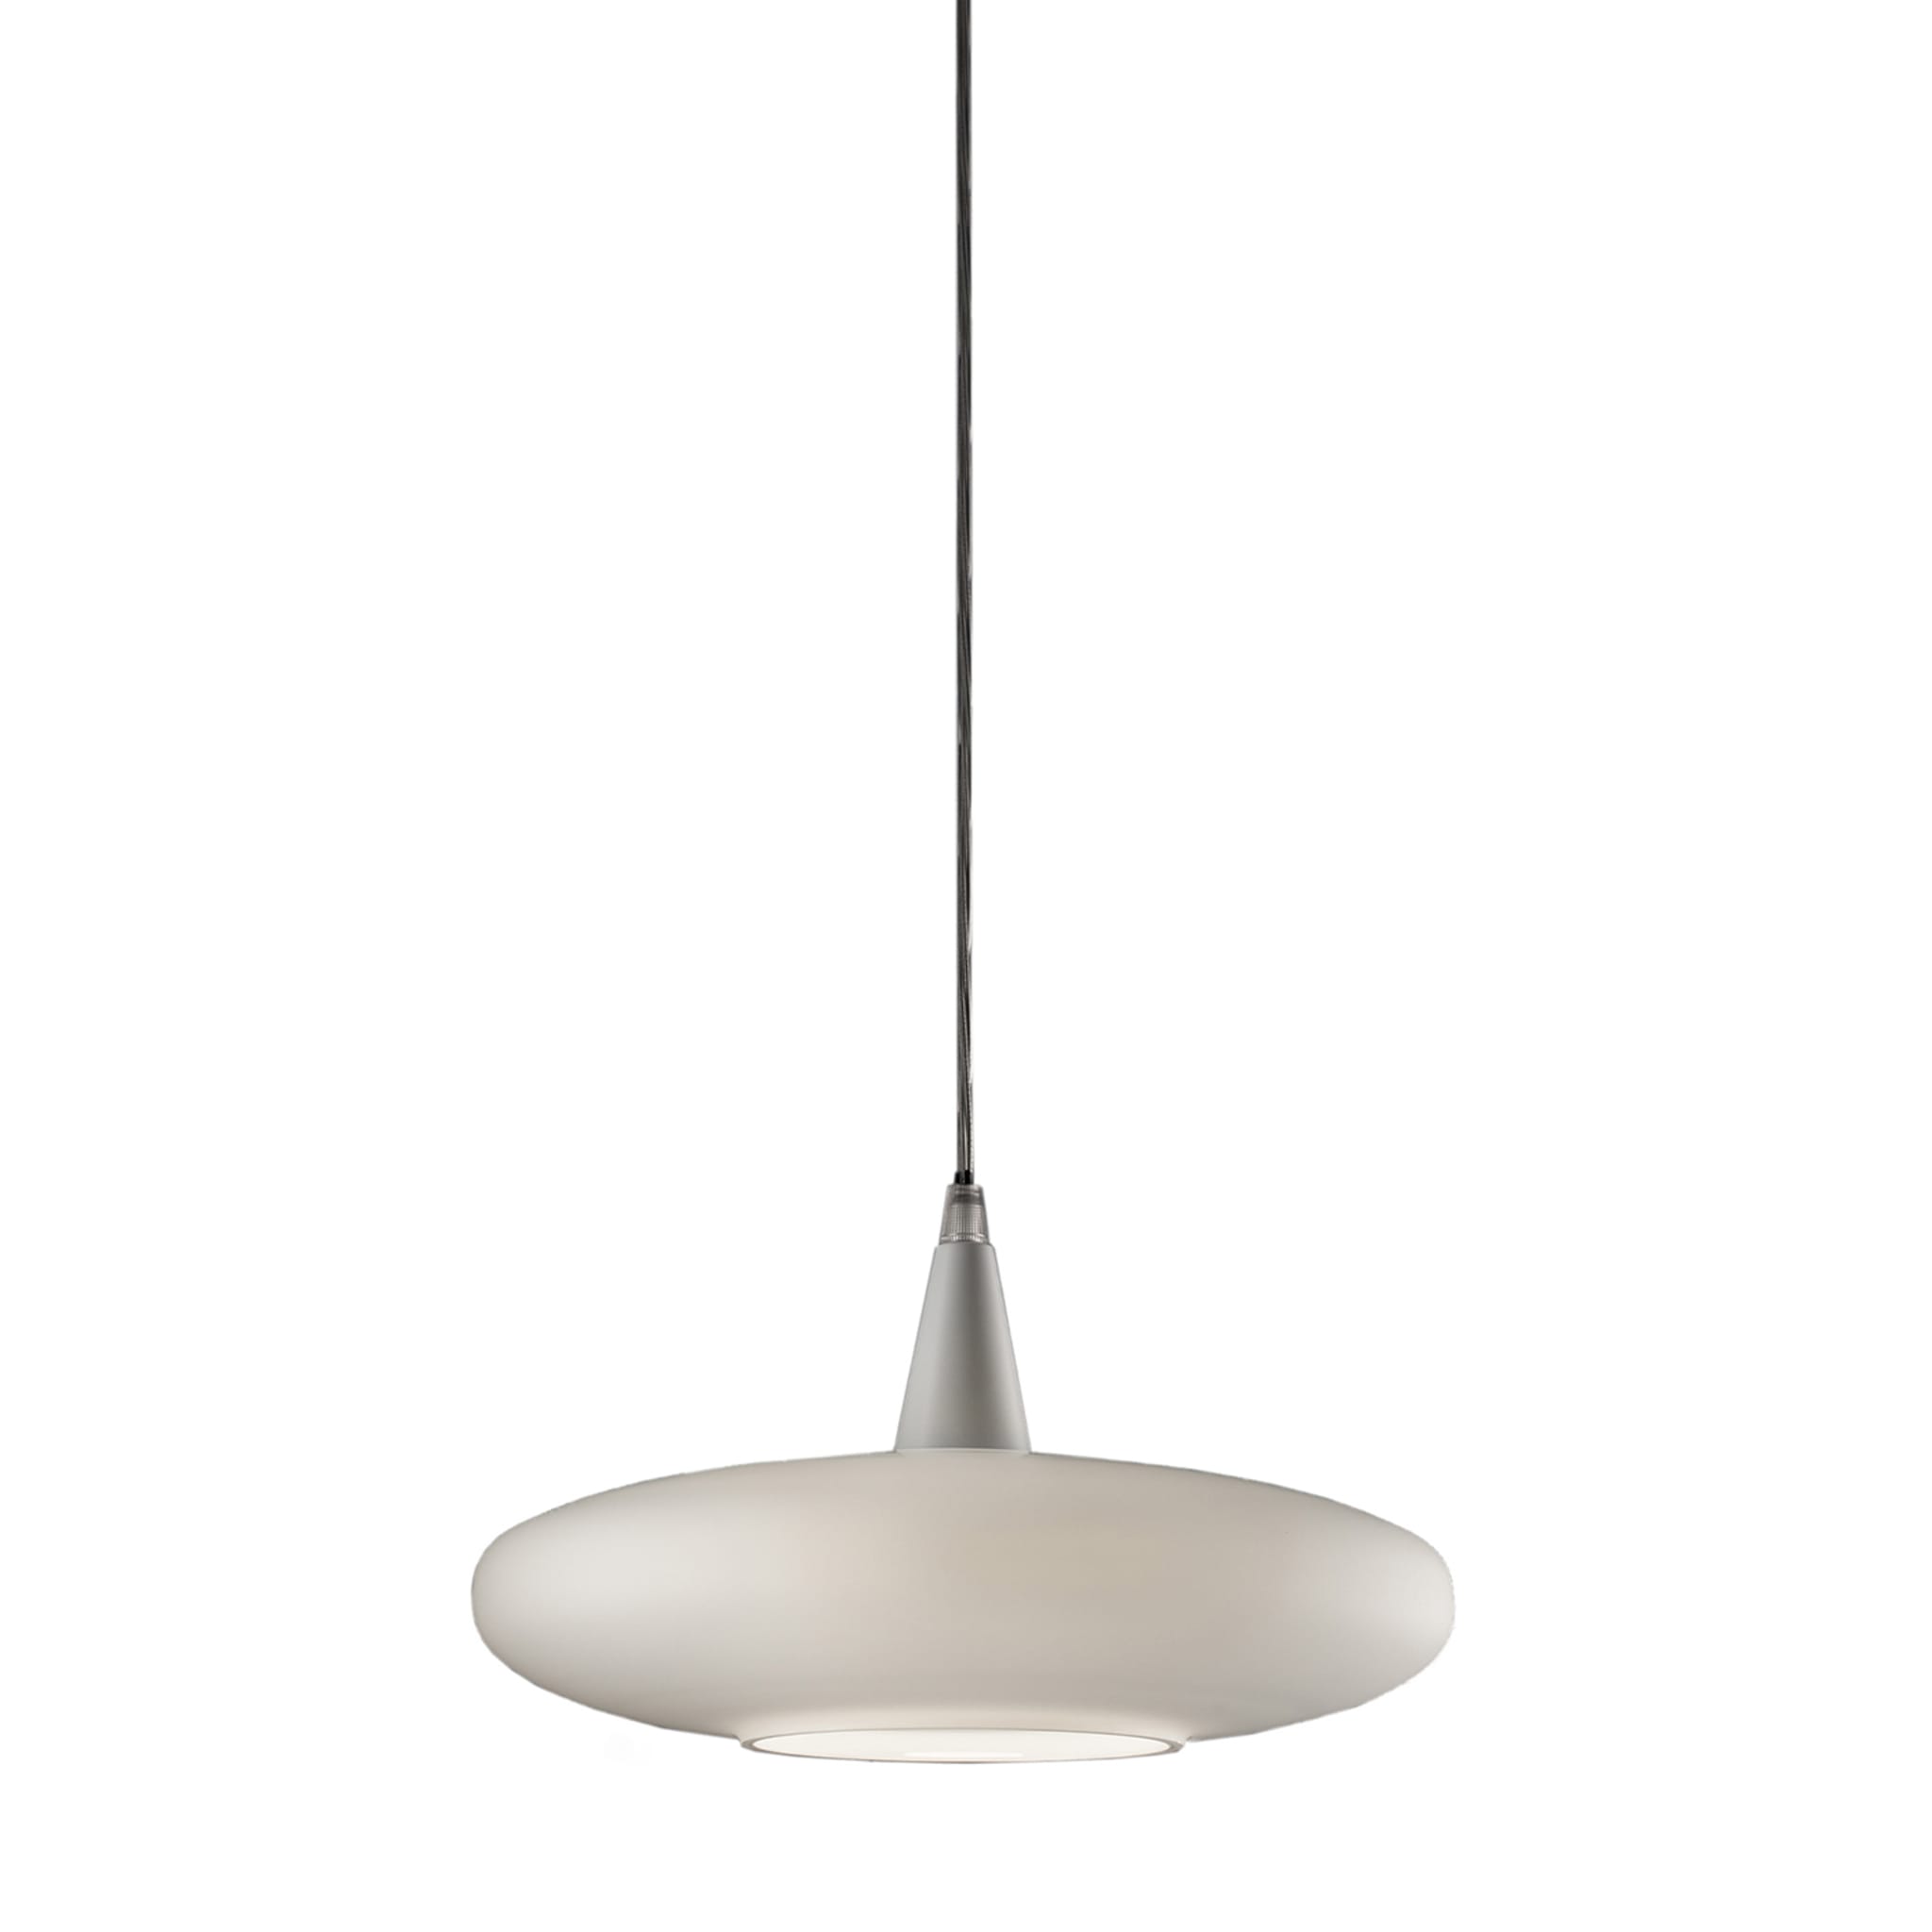 Forme Small White Pendant Lamp #1 - Main view